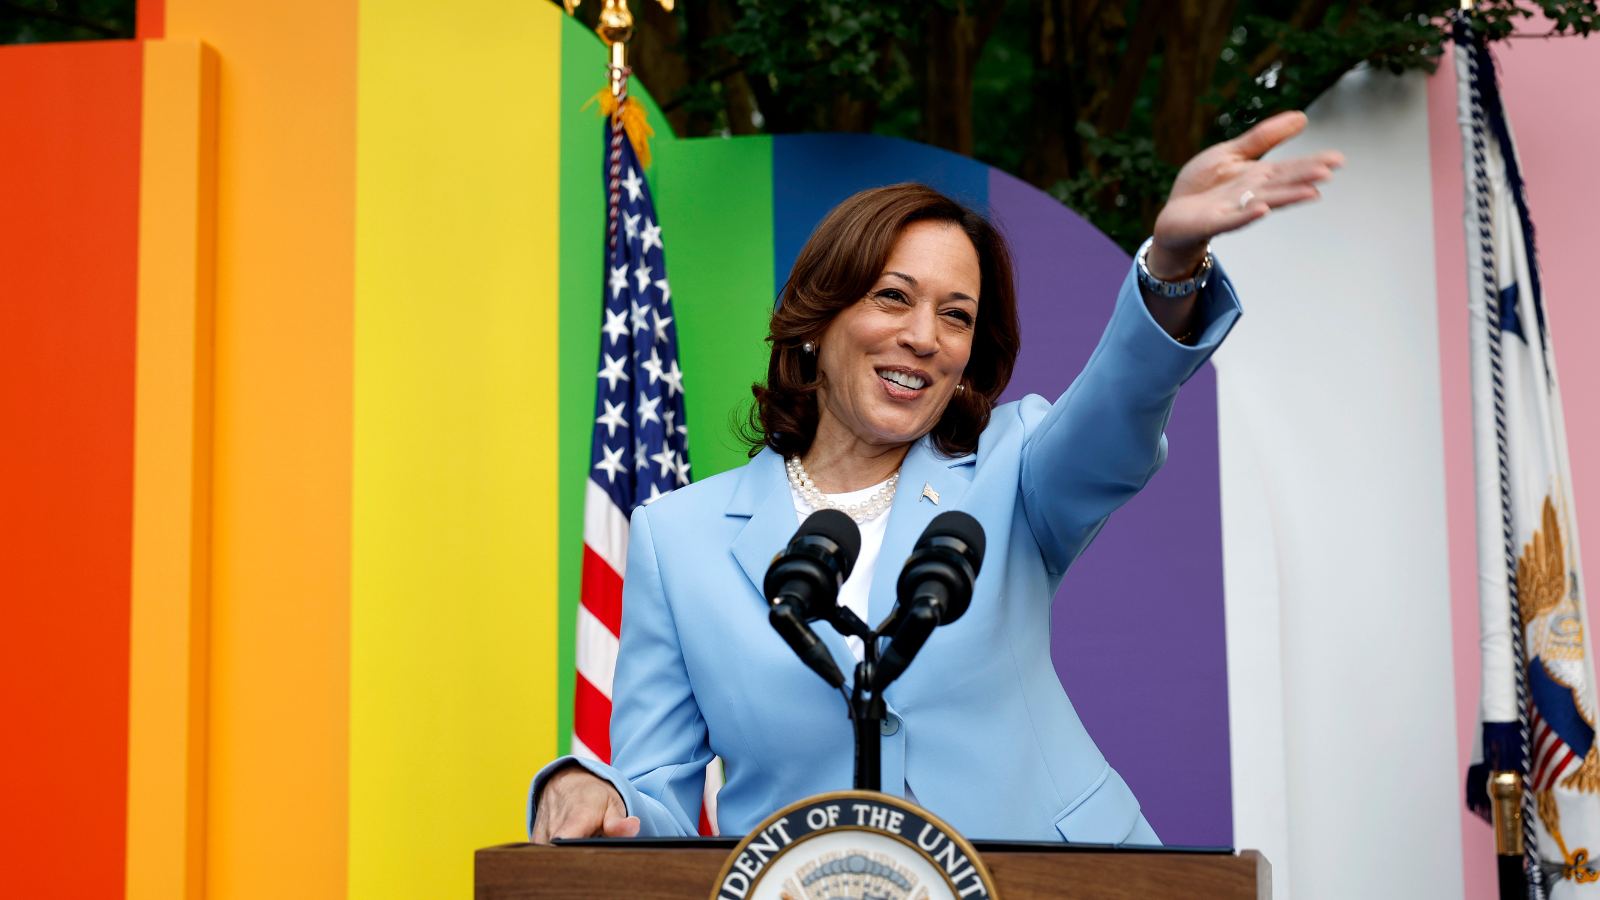 Kamala Harris Arizona visit: What to expect from the VP’s arrival